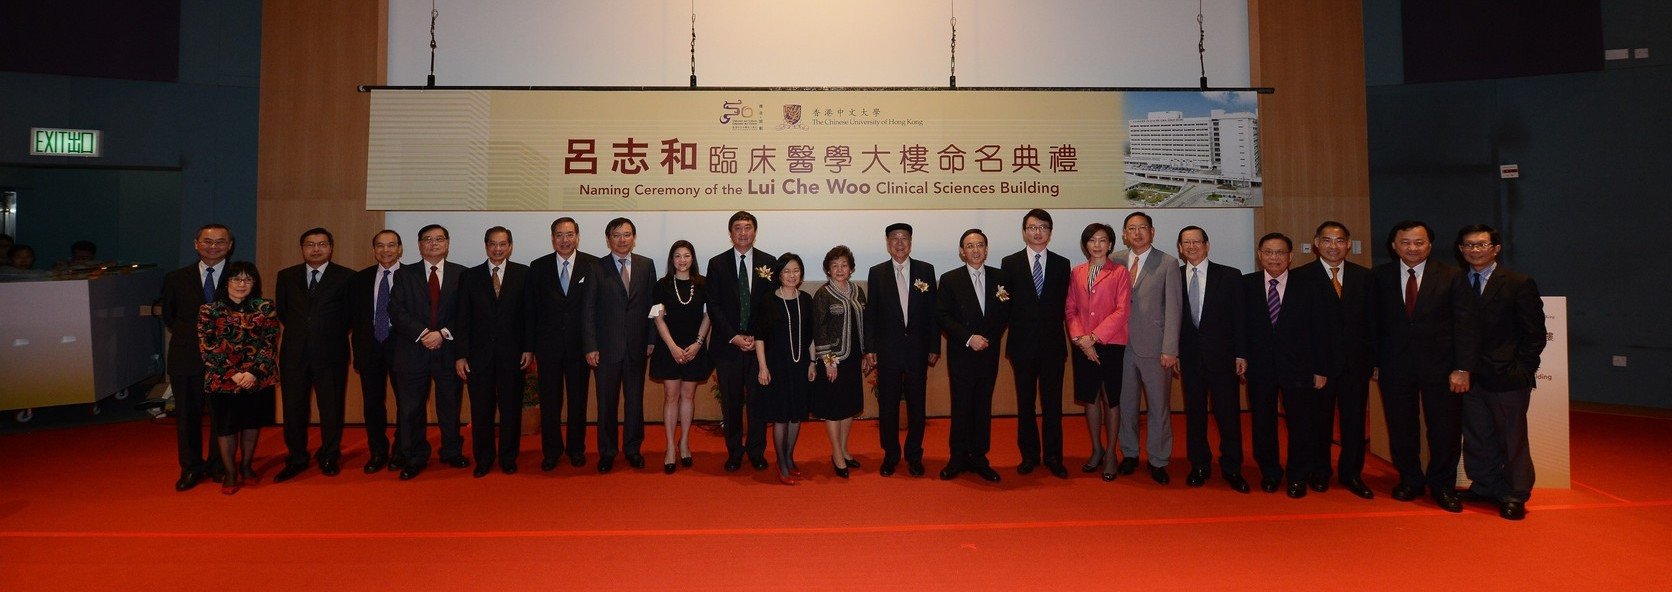 A group photo of Dr. Lui and his family, guests and CUHK members.